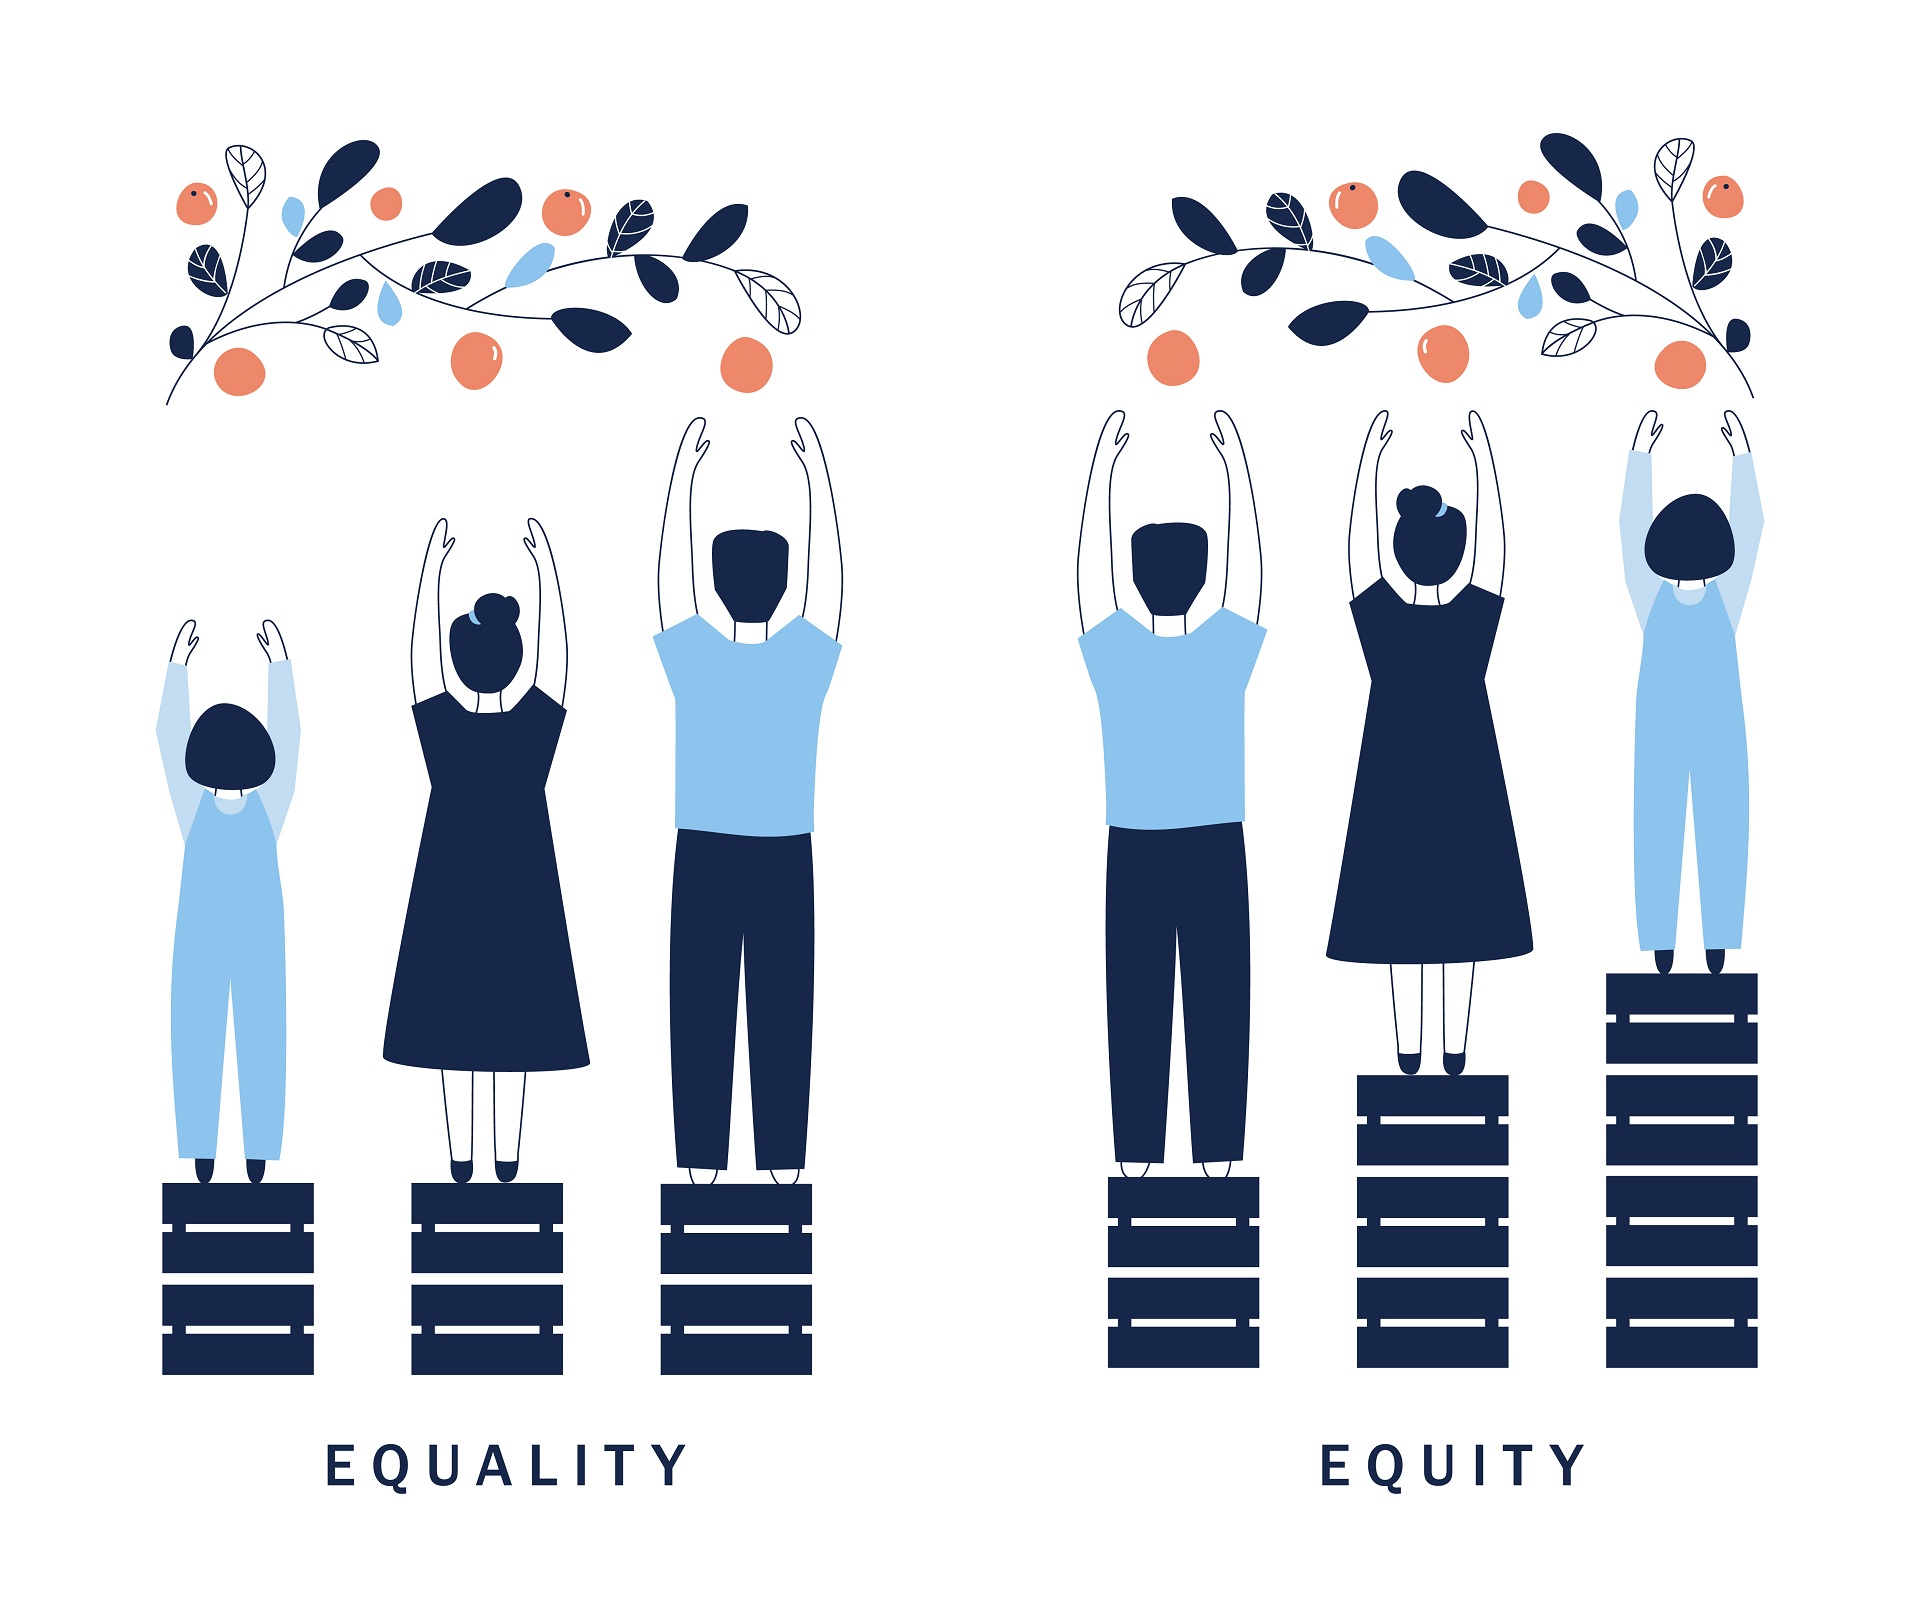 Equality & Equity